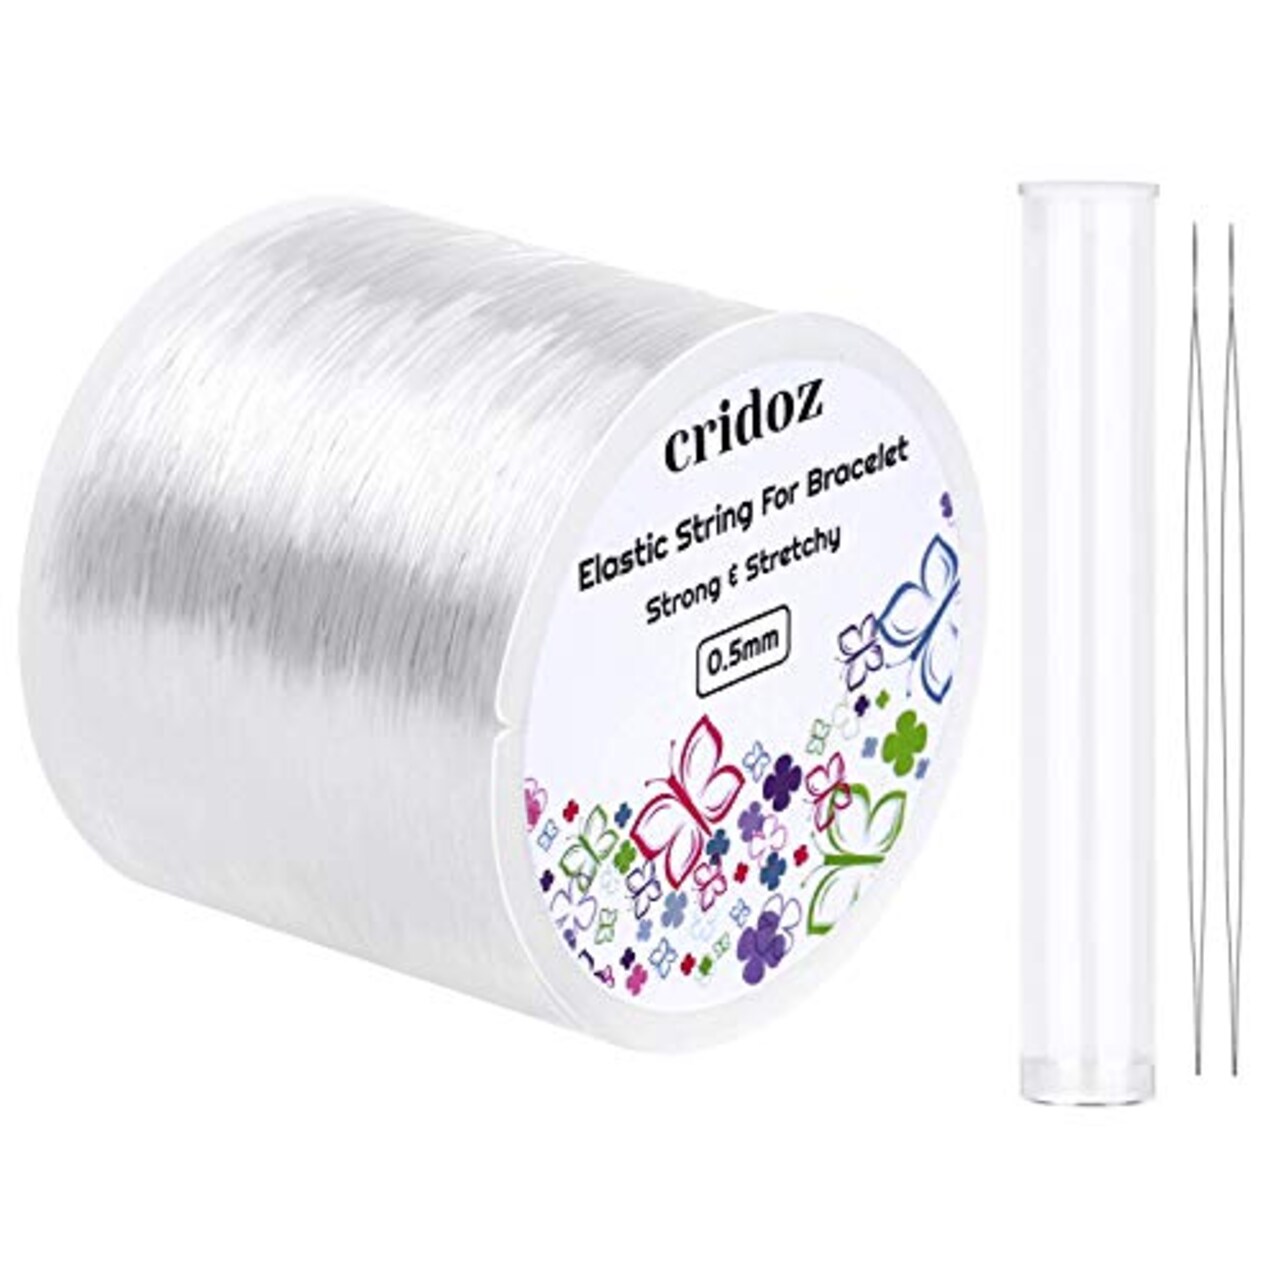 Stretchy String for Bracelets, Cridoz 0.5mm Clear Elastic String Stretch  Cord Jewelry Bead Bracelet String with 2 Pcs Beading Needles for Seed  Beads, Pony Beads, Bracelets and Jewelry Making